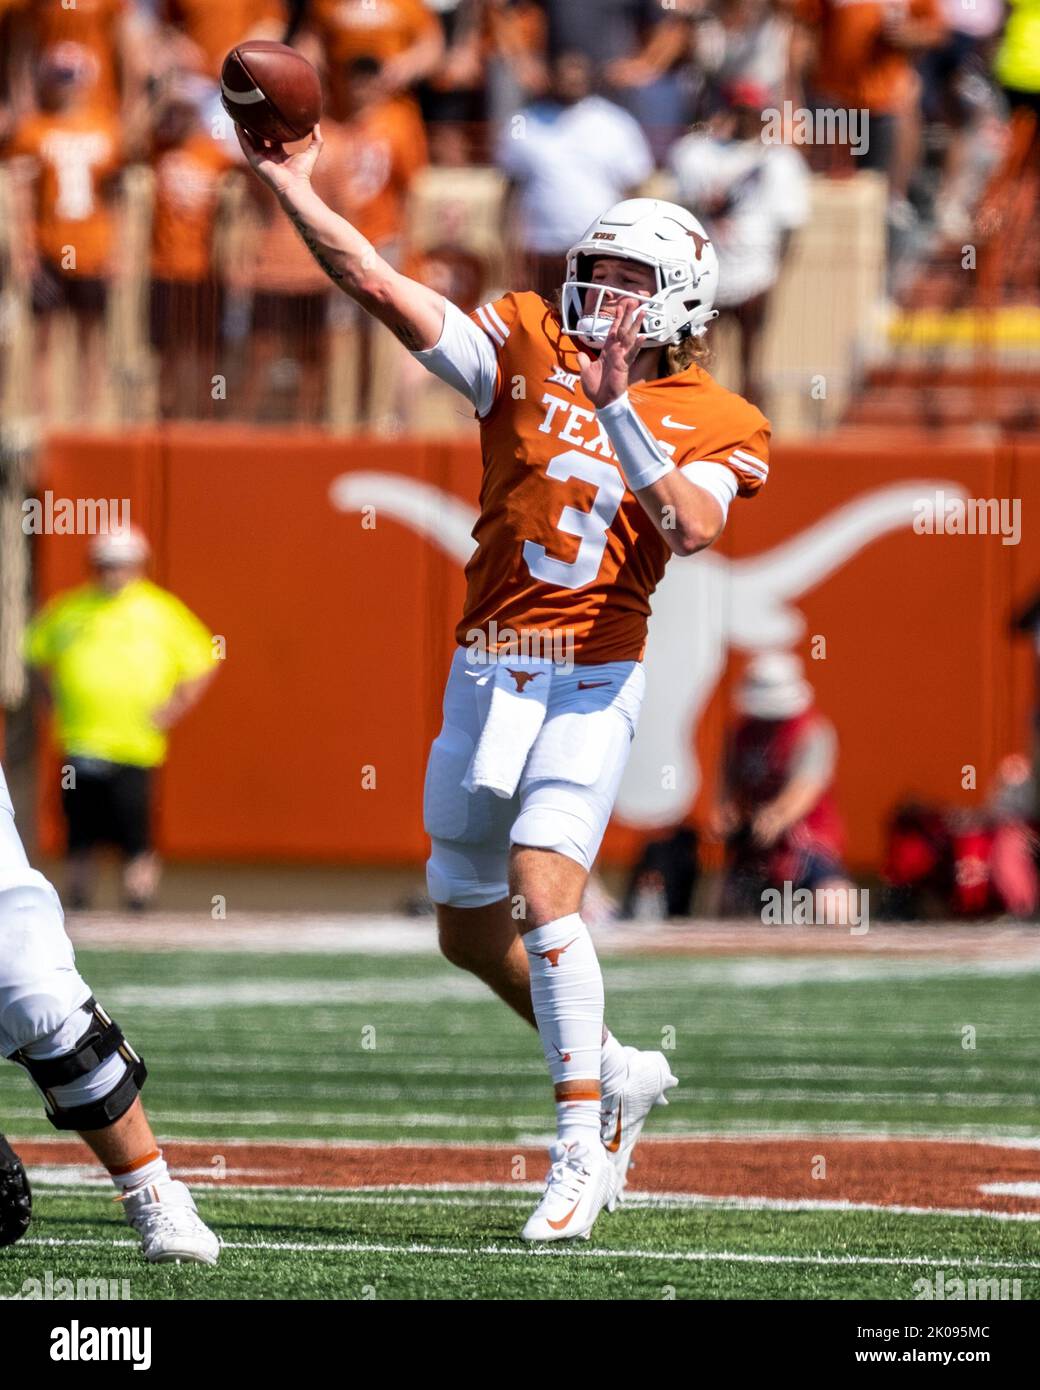 September 10, 2022. QB Quinn Ewers #3 of the Texas Longhorns in action vs the Alabama Crimson Tide at DKR-Memorial Stadium. Texas and Alabama are tied 10-10 at the half. Stock Photo